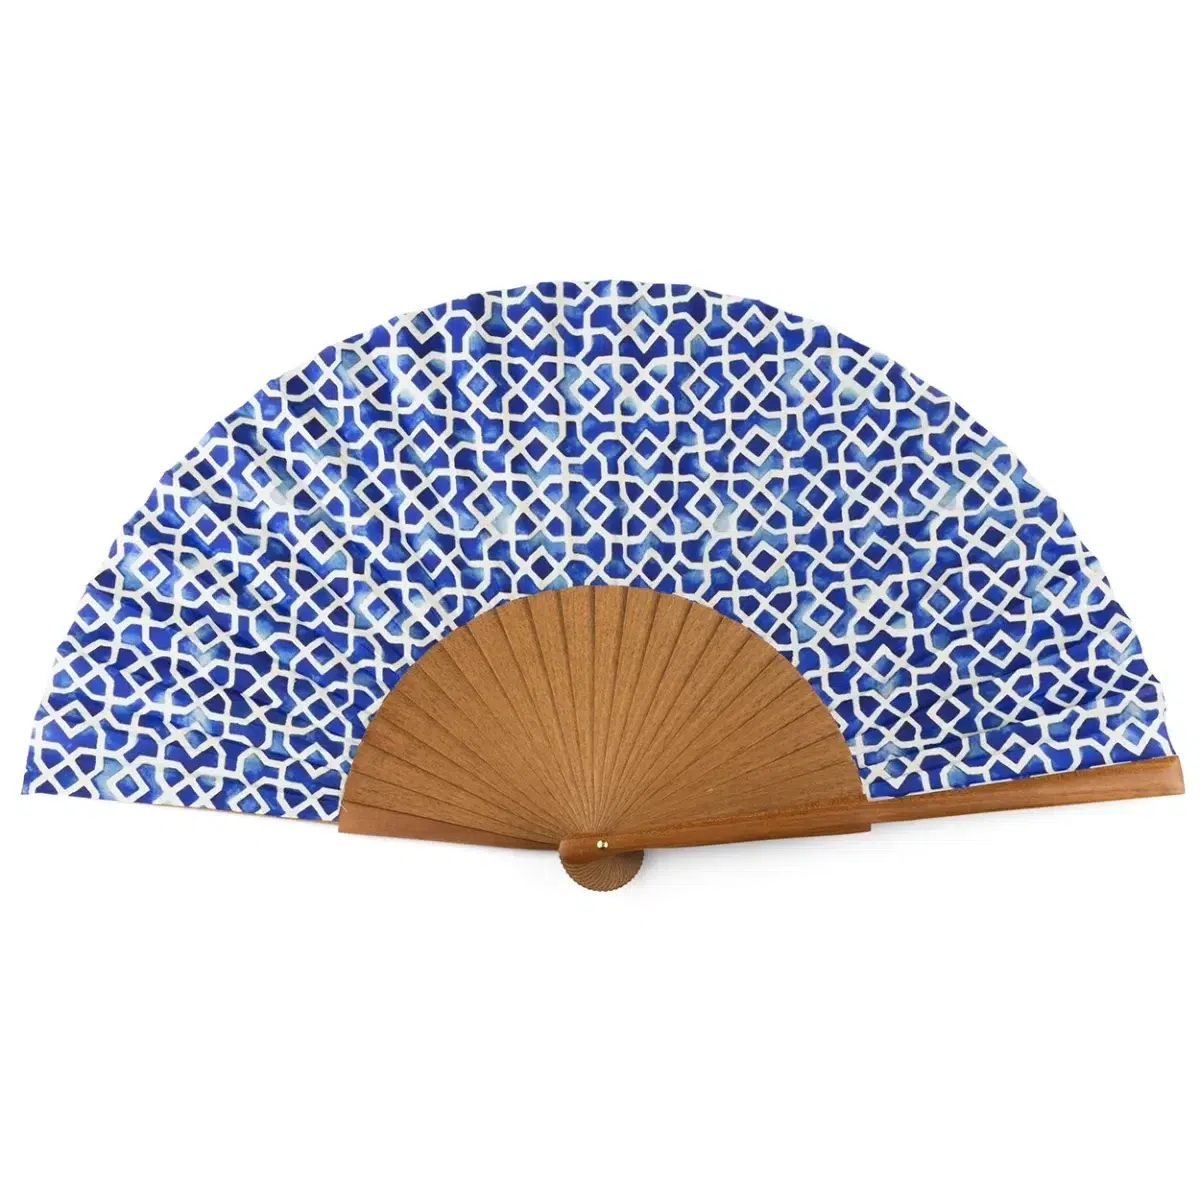 Blue and white silk fan with a pattern inspired by the Alhambra of Granada.